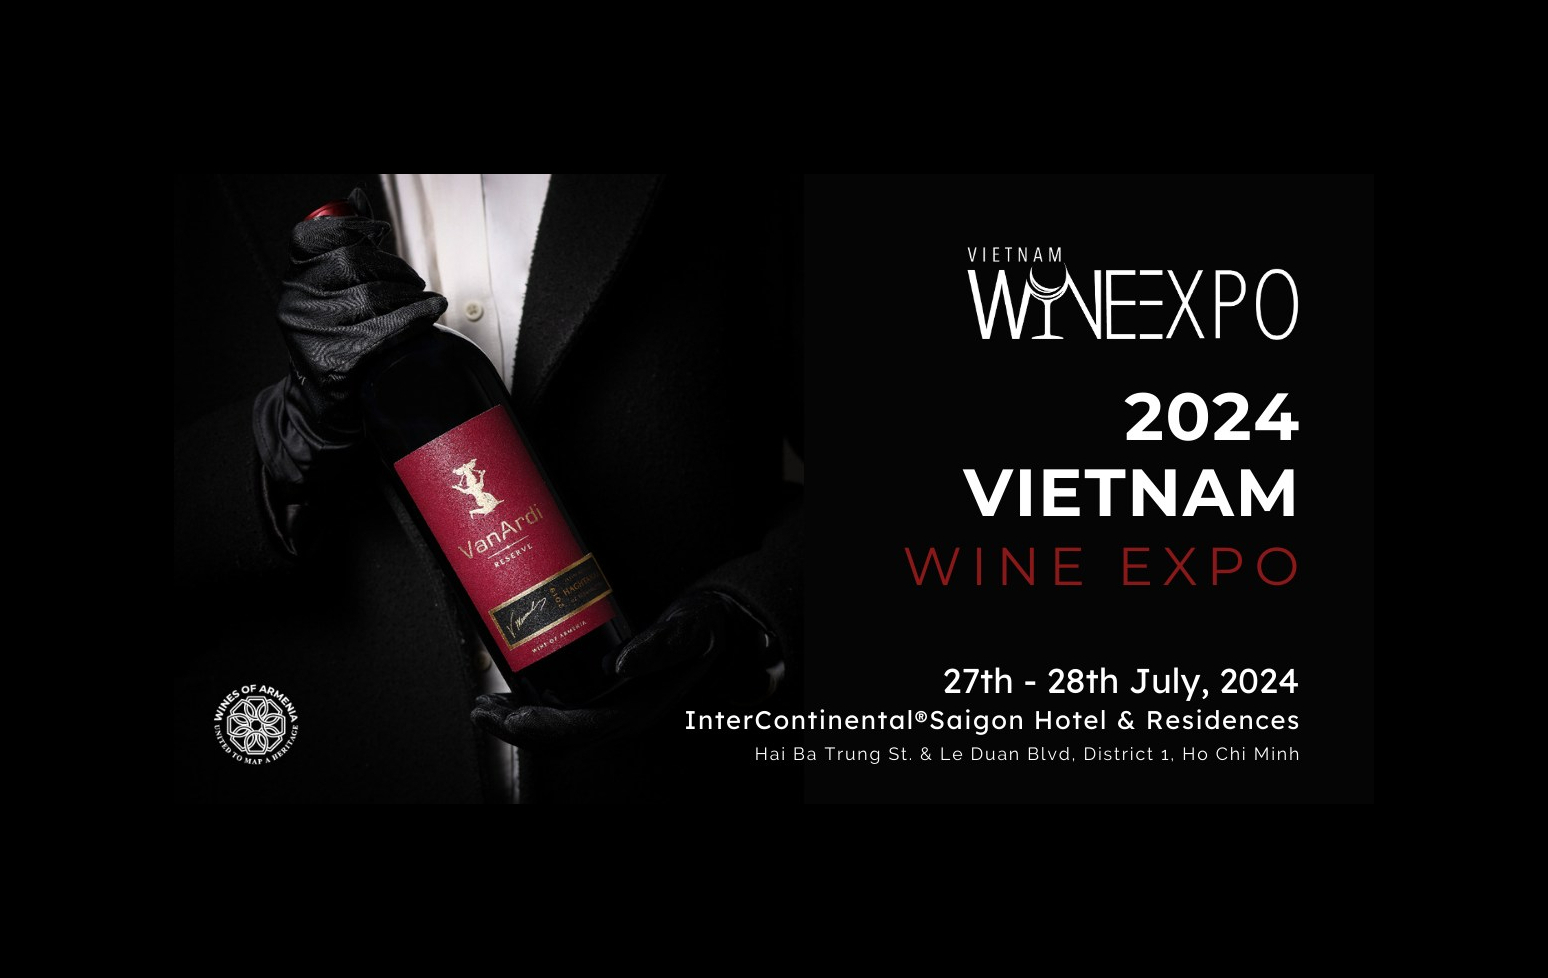 Announcing The Vietnam Wine Expo 2024!